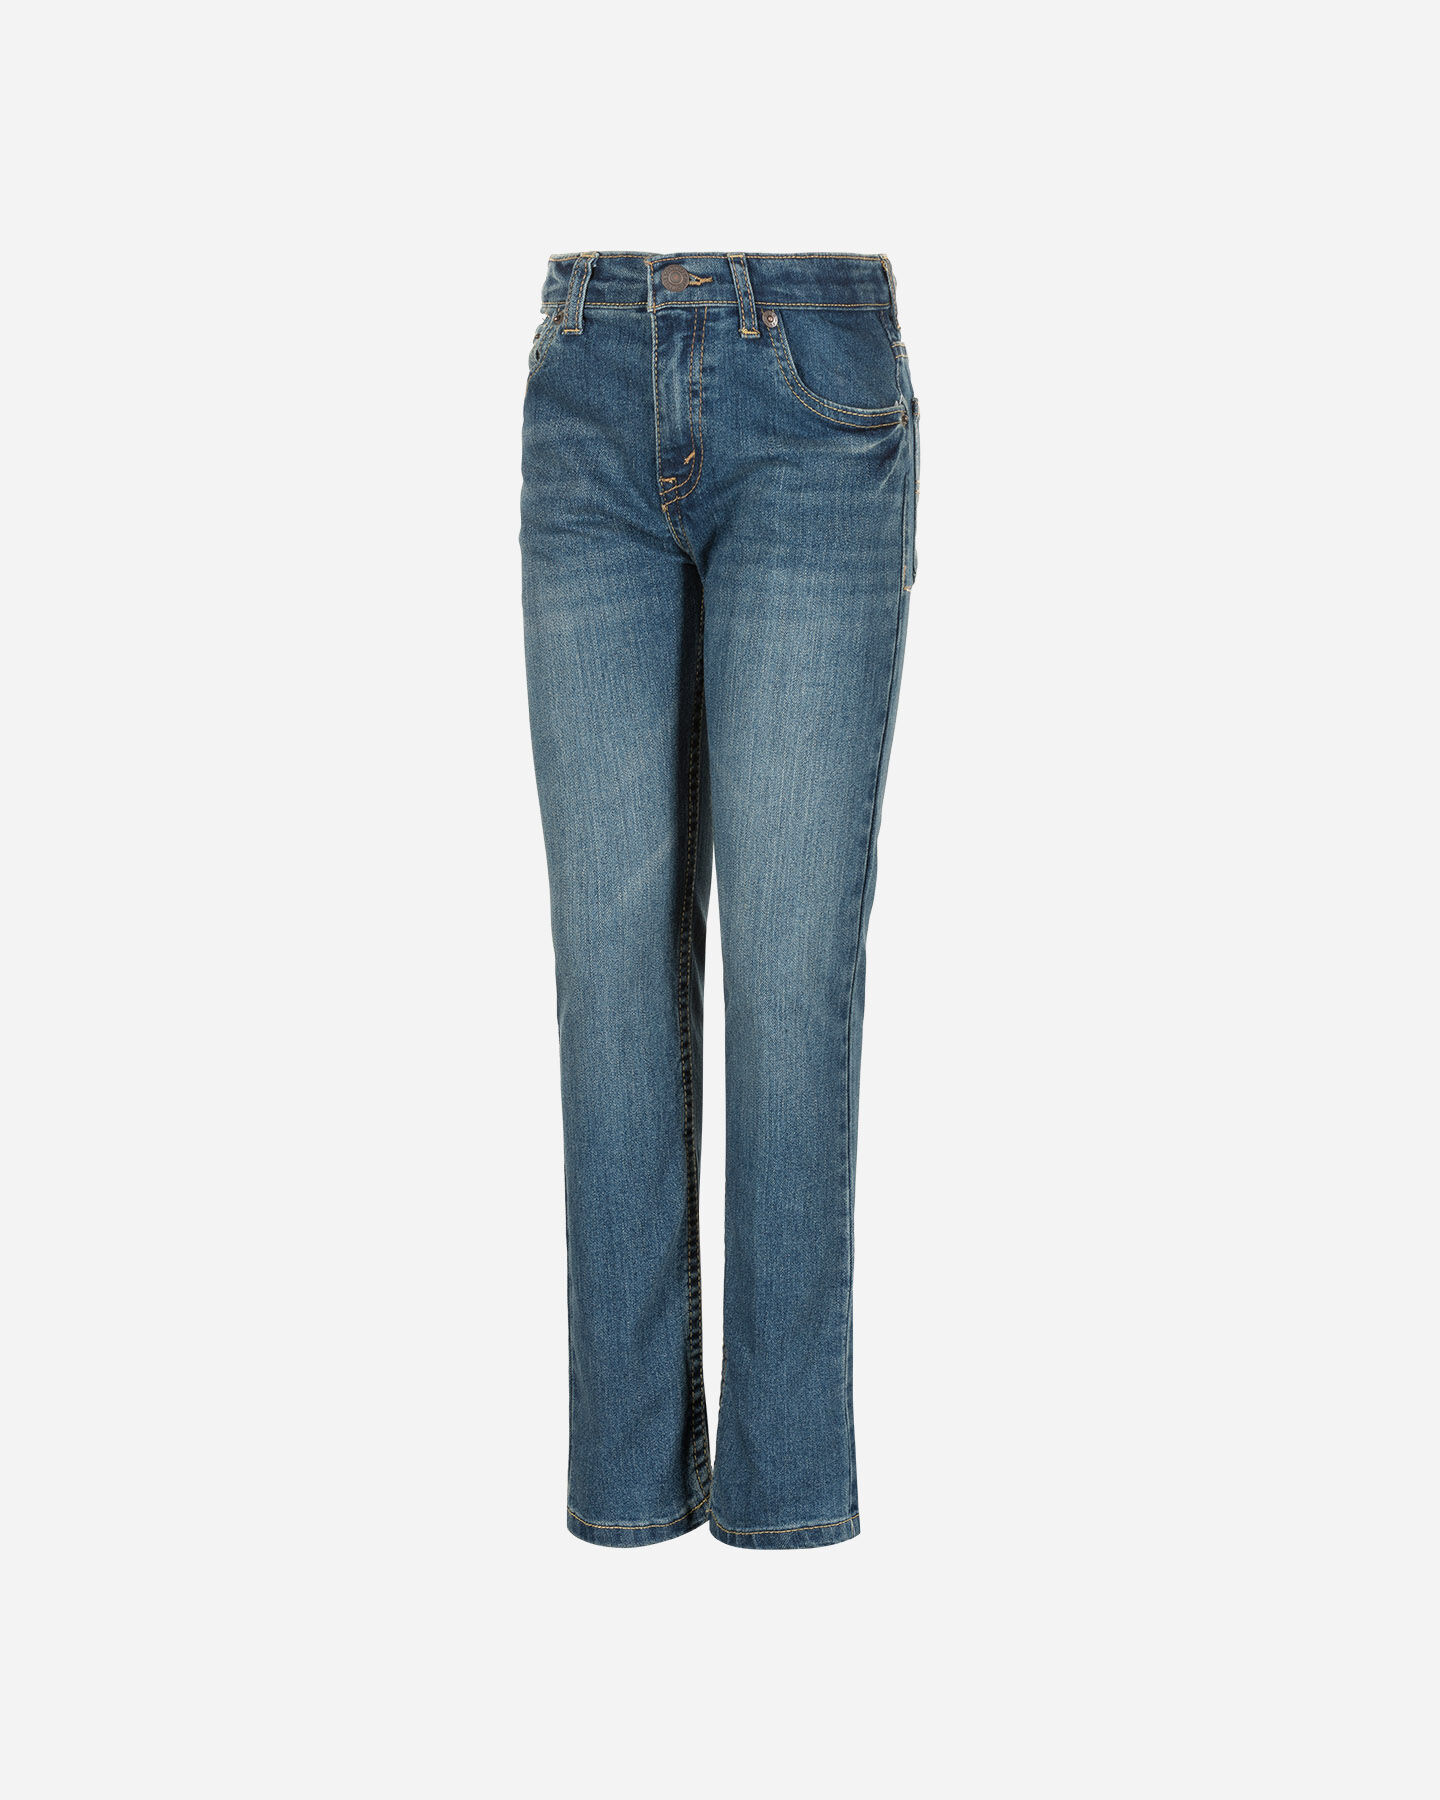  Jeans LEVI'S 511 SLIM JR S4076433|M8N|6A scatto 0